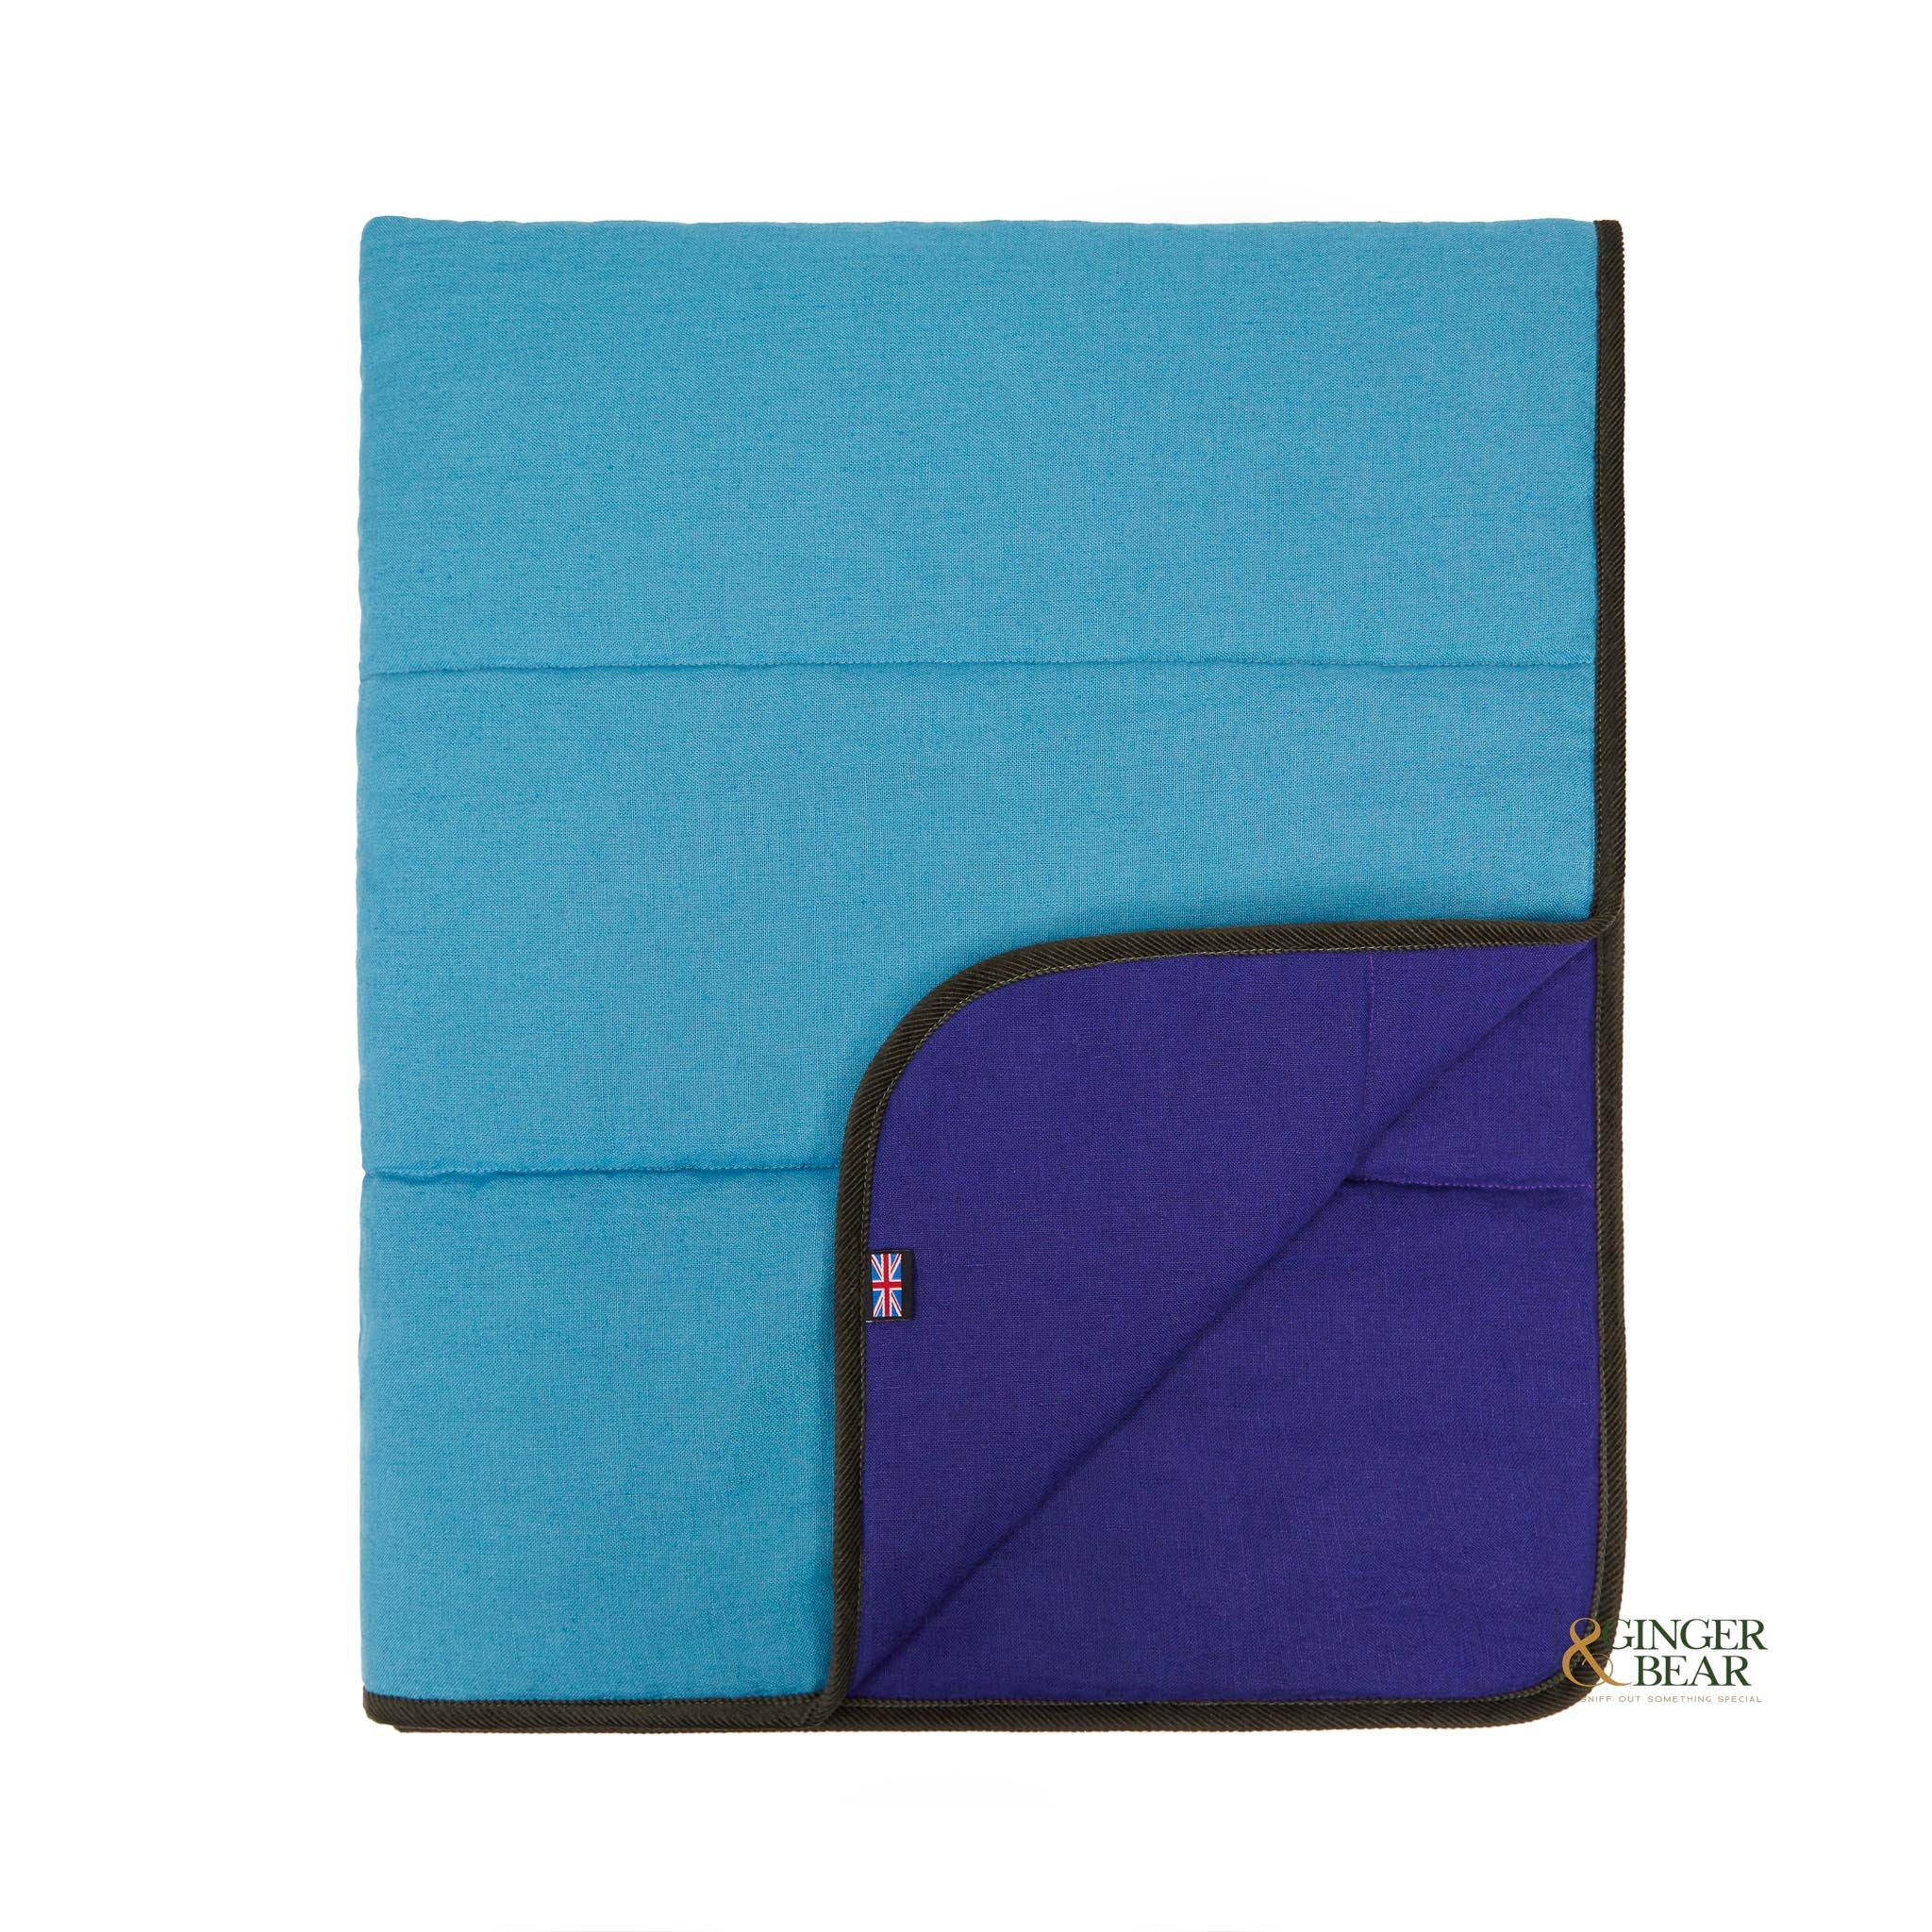 LISH Padbury Reversible Linen Dog Blanket, in Teal Blue and Blueberry Purple